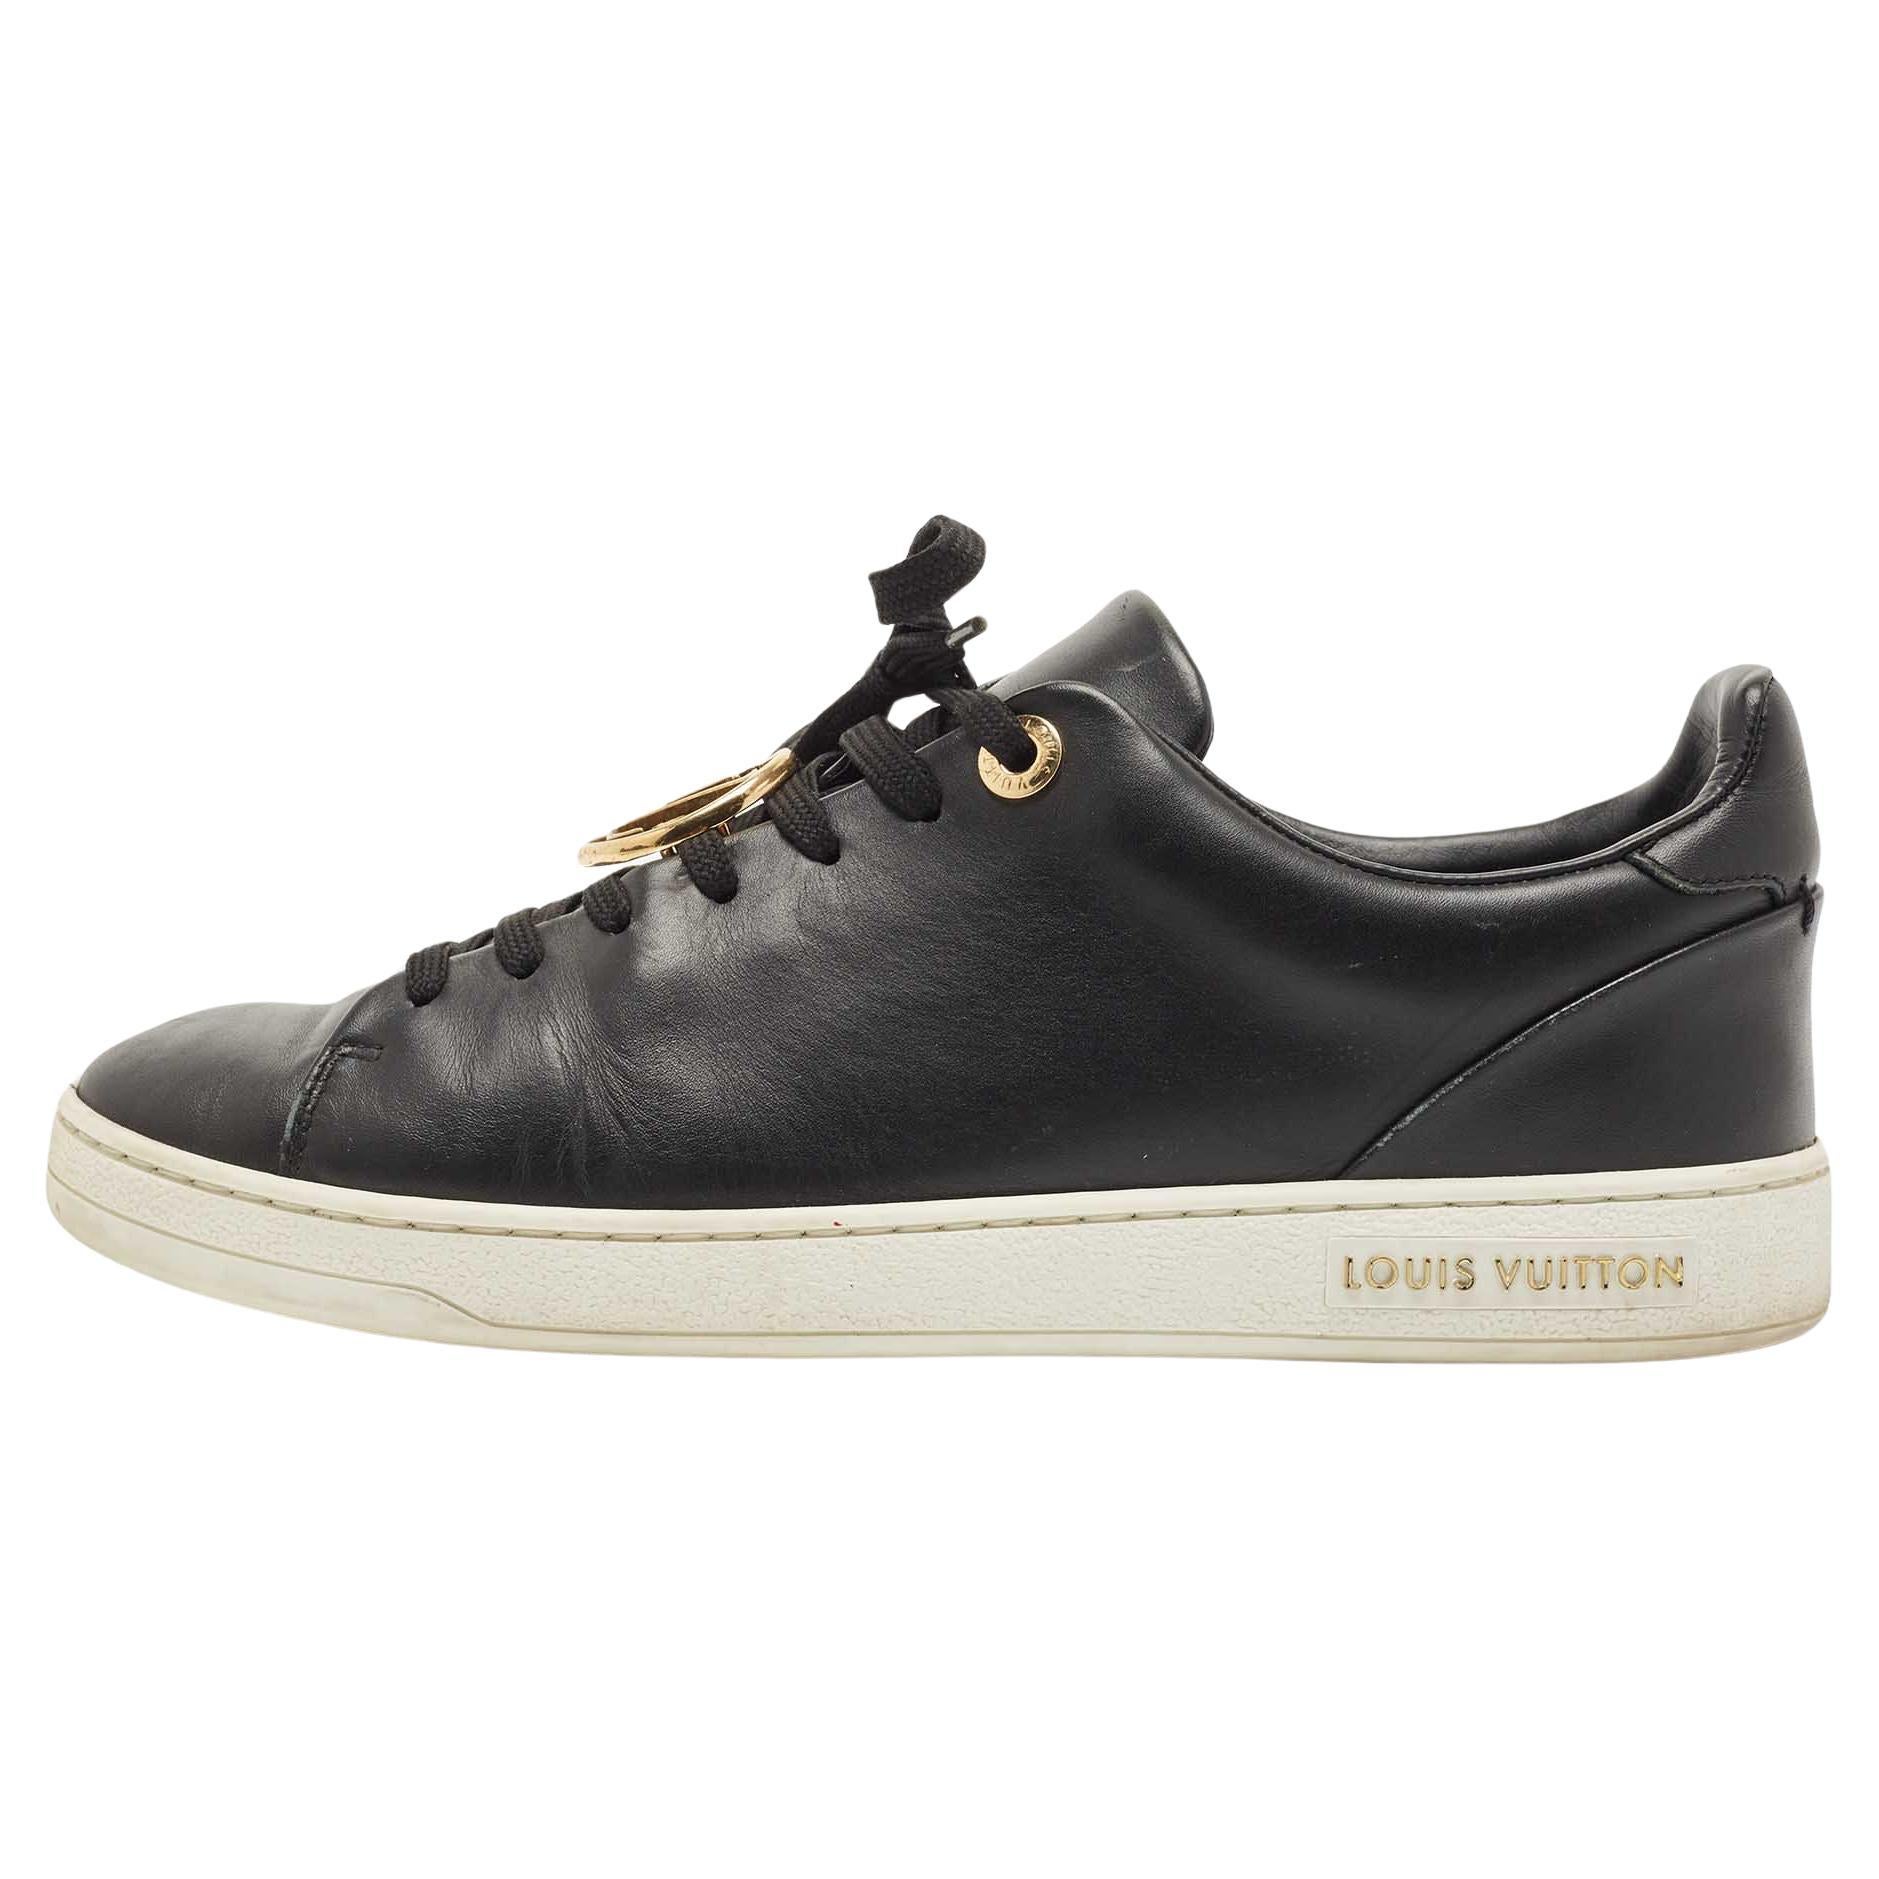 Louis Vuitton Black Leather Frontrow Sneakers Size 36.5 For Sale